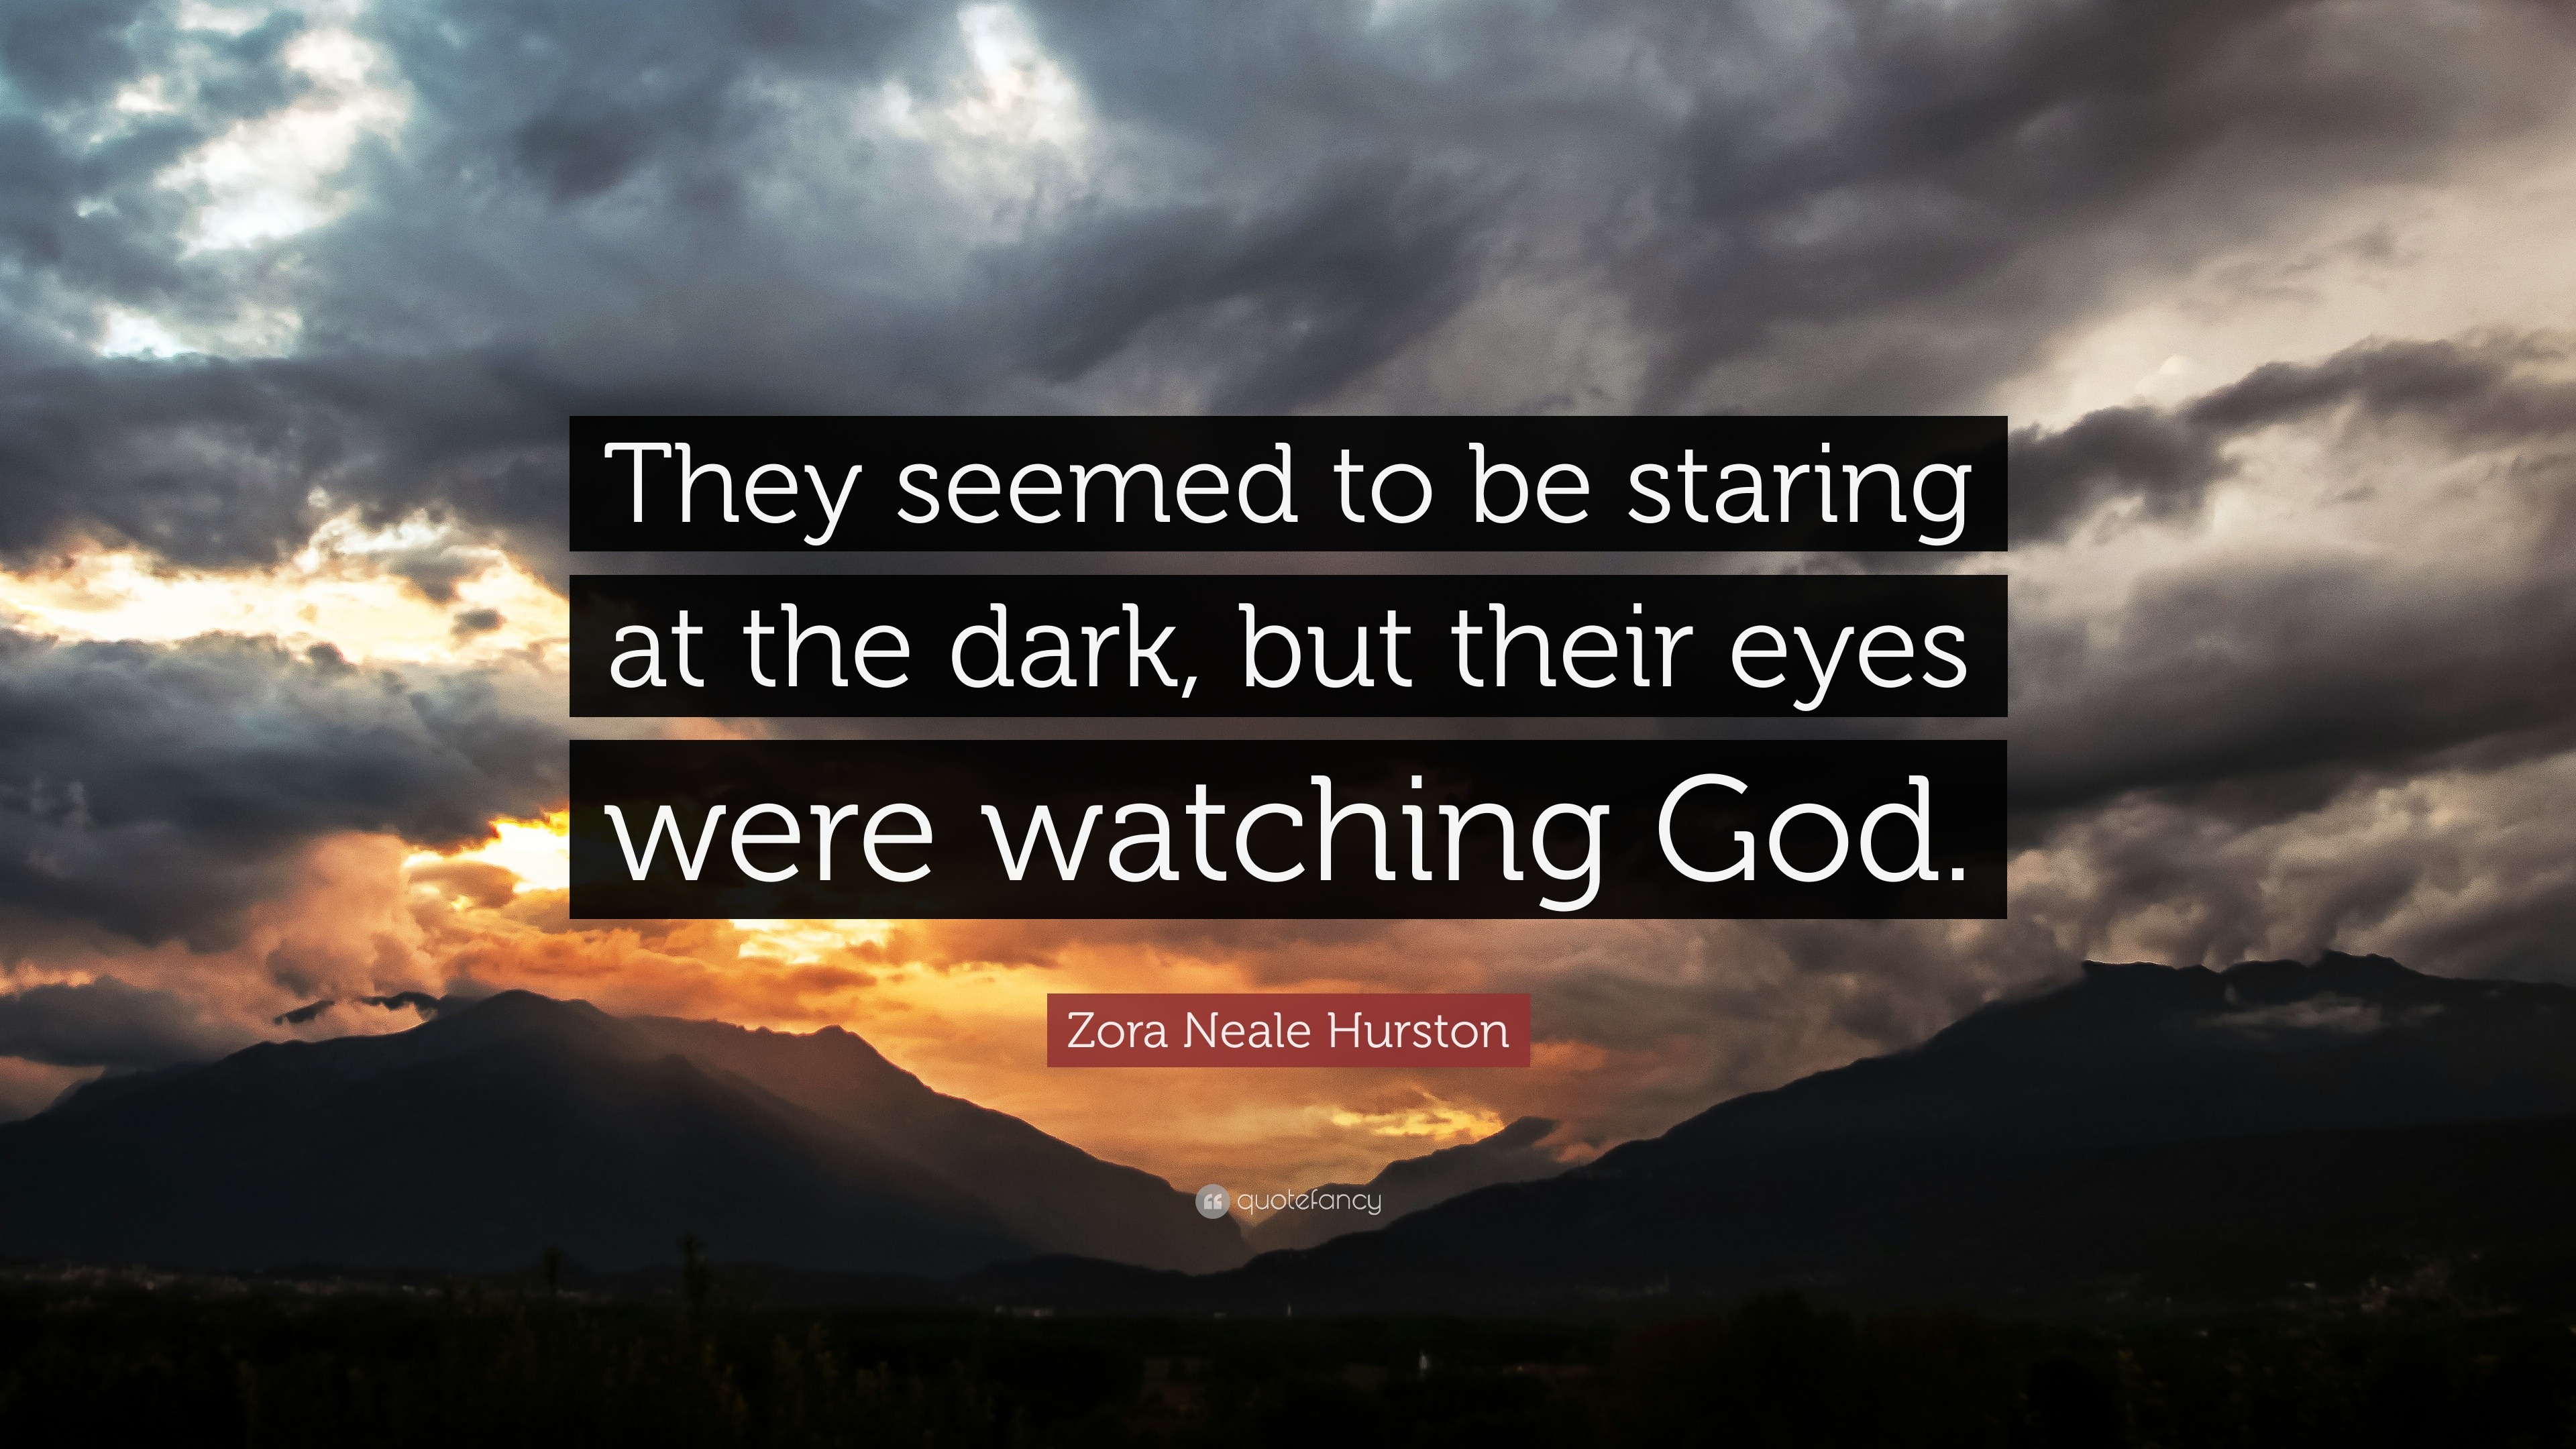 Zora Neale Hurston Quote: "They seemed to be staring at the dark, but their eyes were watching ...